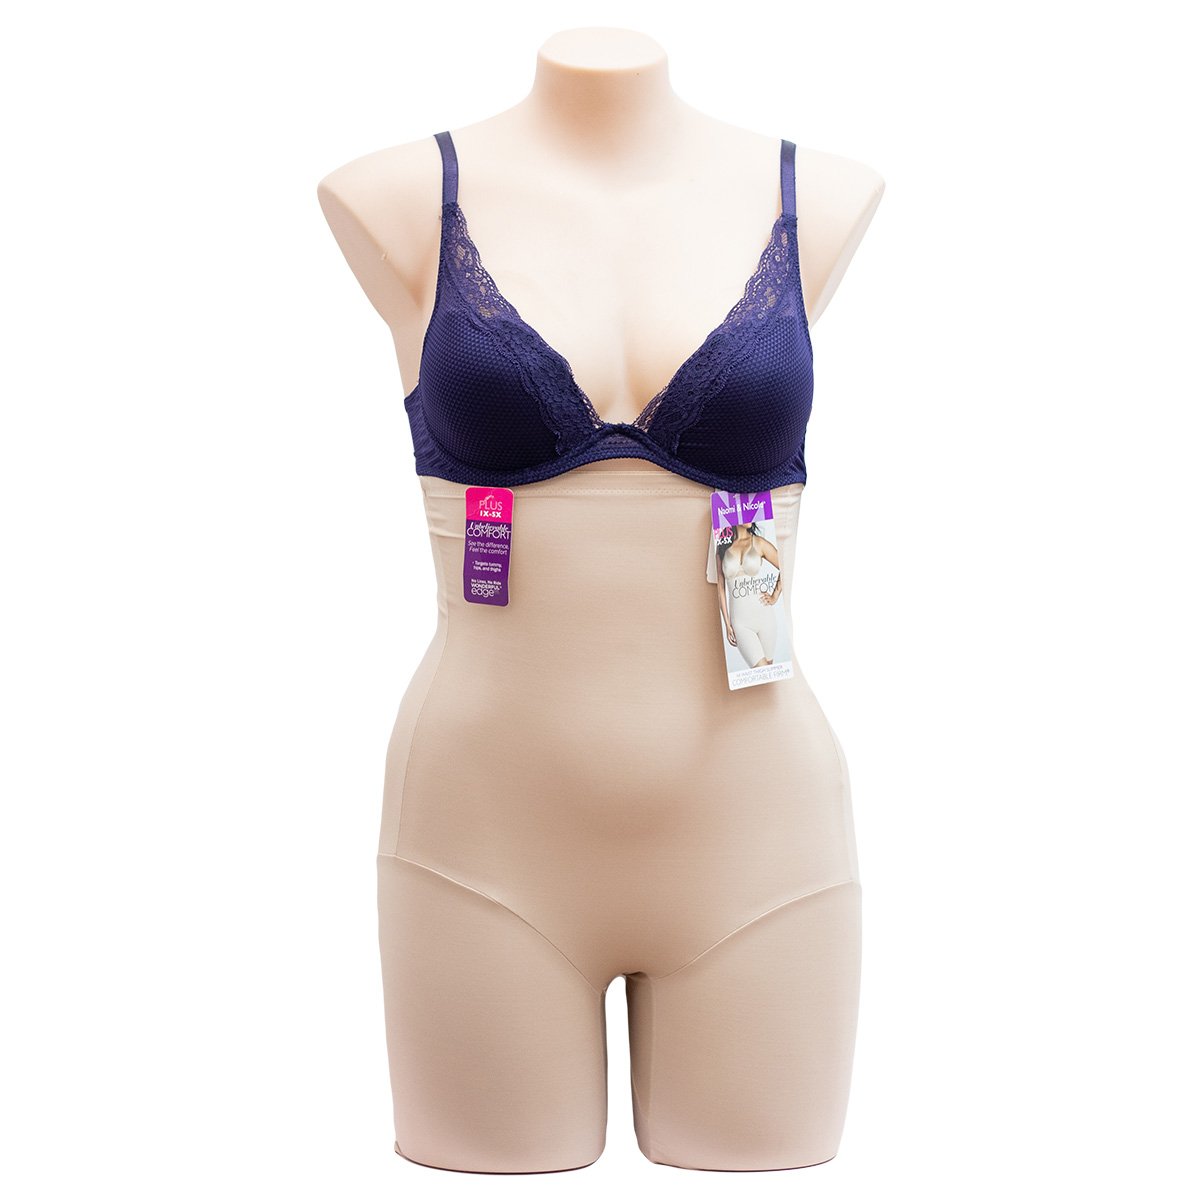 Naomi & Nicole Hi Waist Thigh Slimmer Comfortable Firm 7779 - Shapewear Nude / 16 / XL  Available at Illusions Lingerie